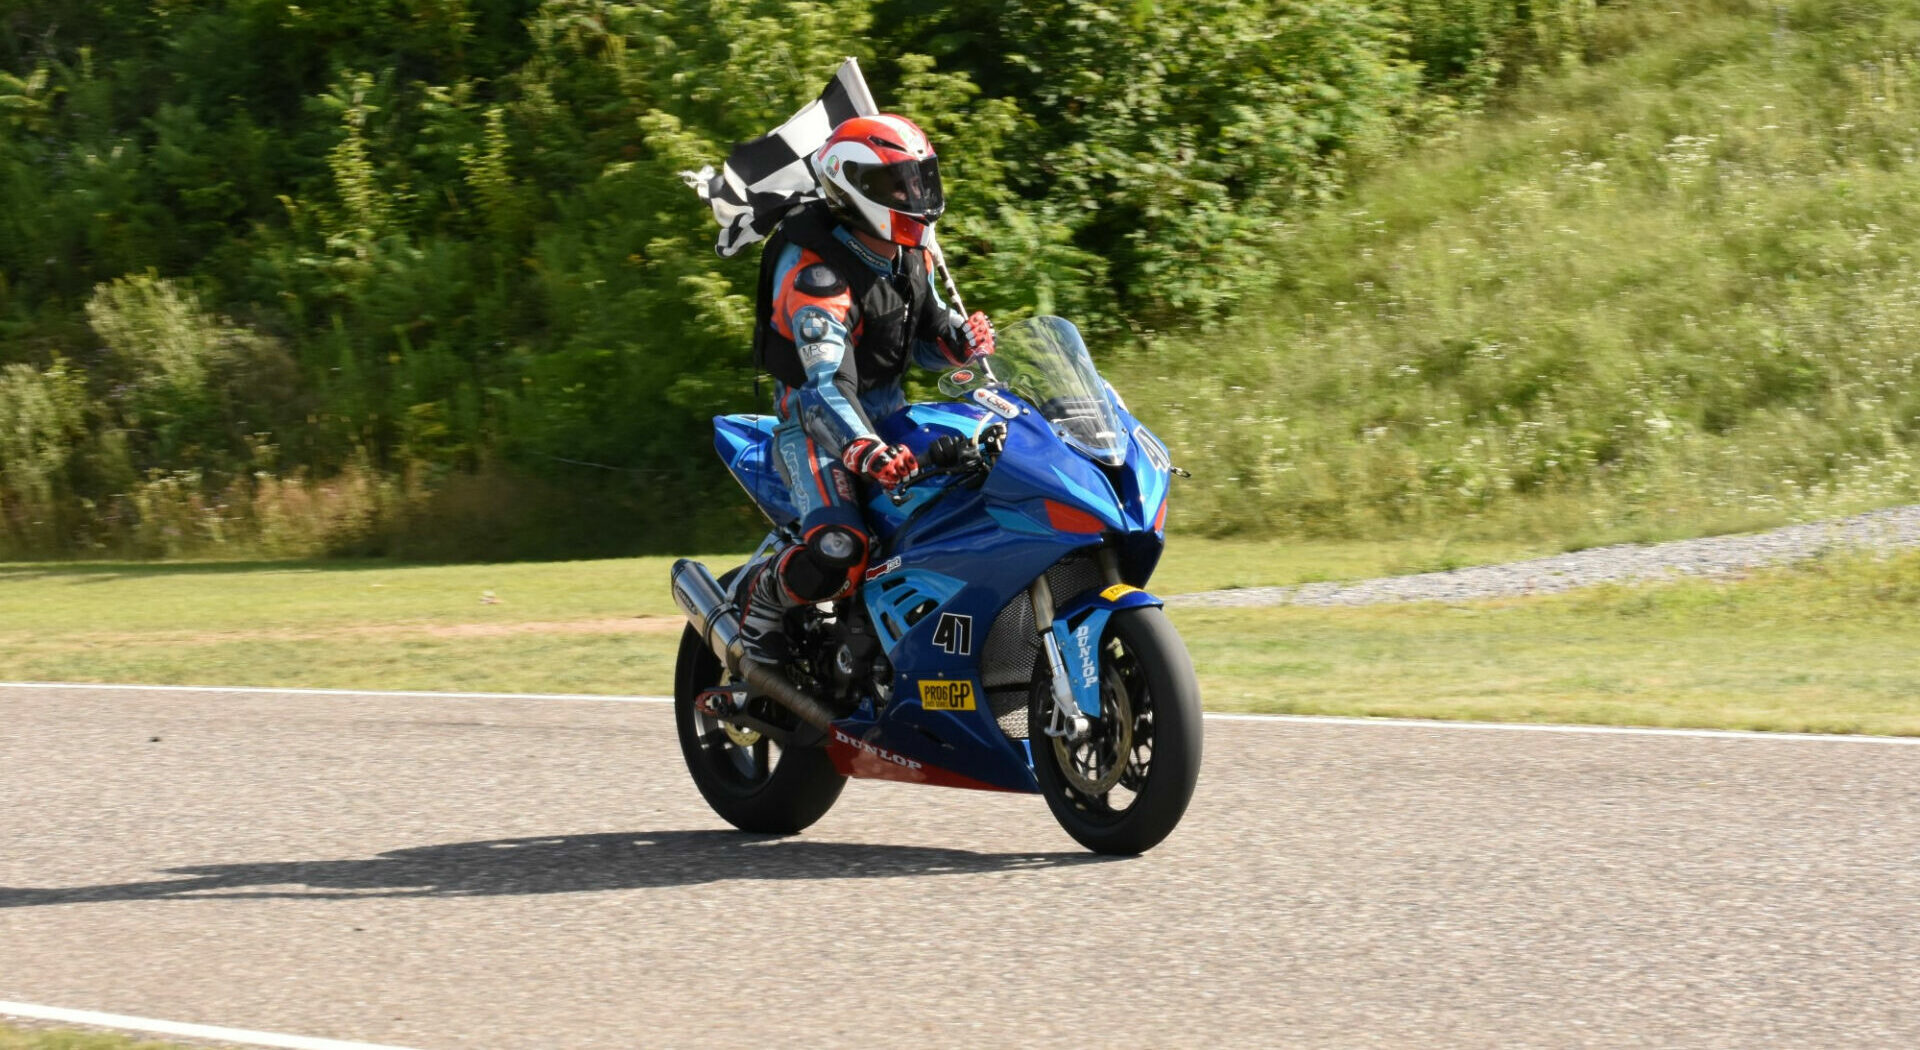 Rookie Pro Anthony Bergeron (41) scored his first Pro Superbike victory in the penultimate round of the Pro 6 GP championship at Calabogie. Photo by Colin Fraser, courtesy PMP.